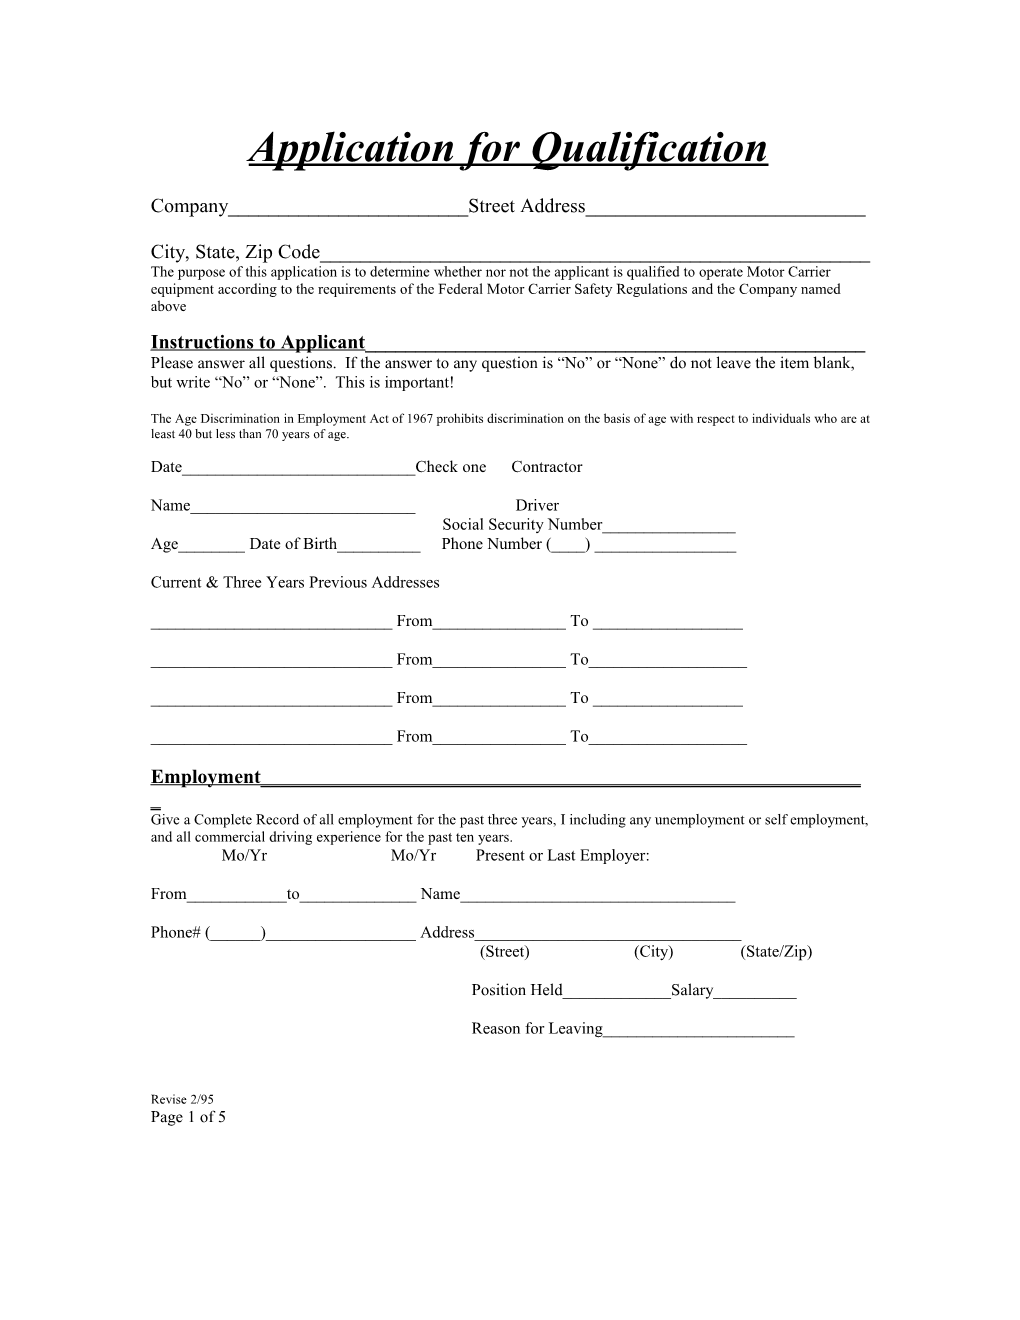 Application for Qualification